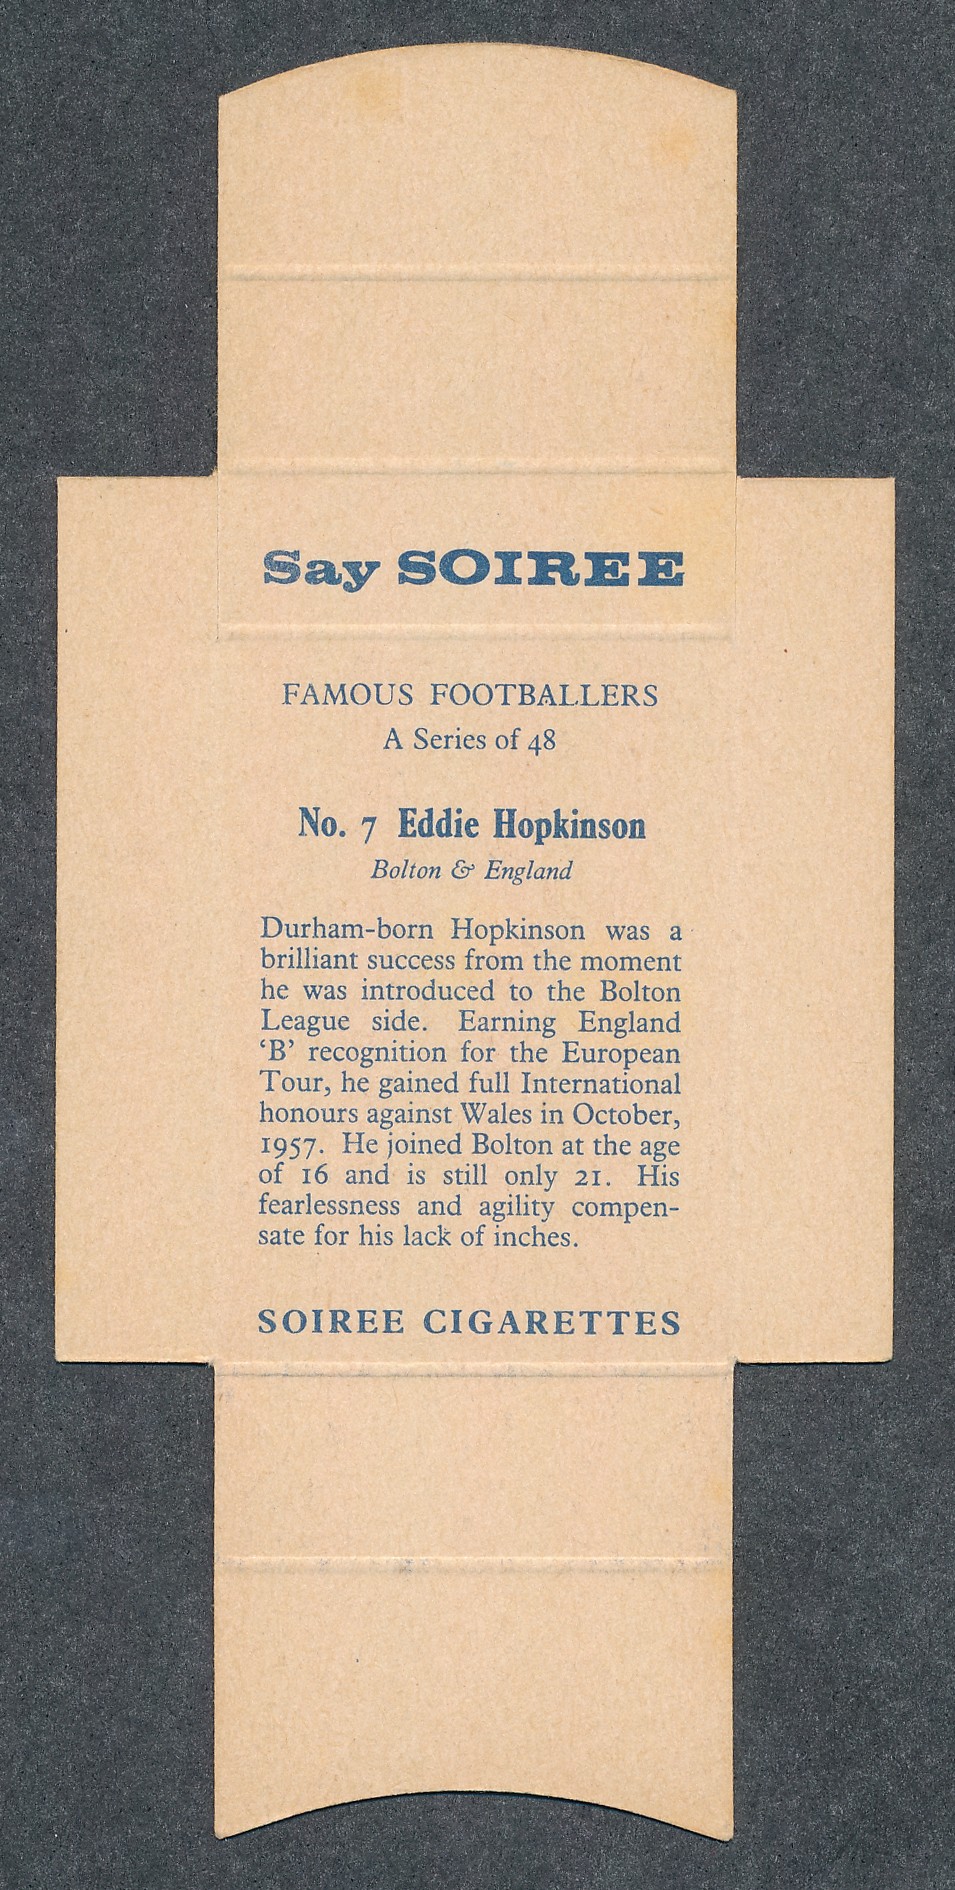 Soiree Cigarettes, Mauritius, Famous Footballers uncut packet issue, No.7 Eddie Hopkinson, - Image 2 of 2